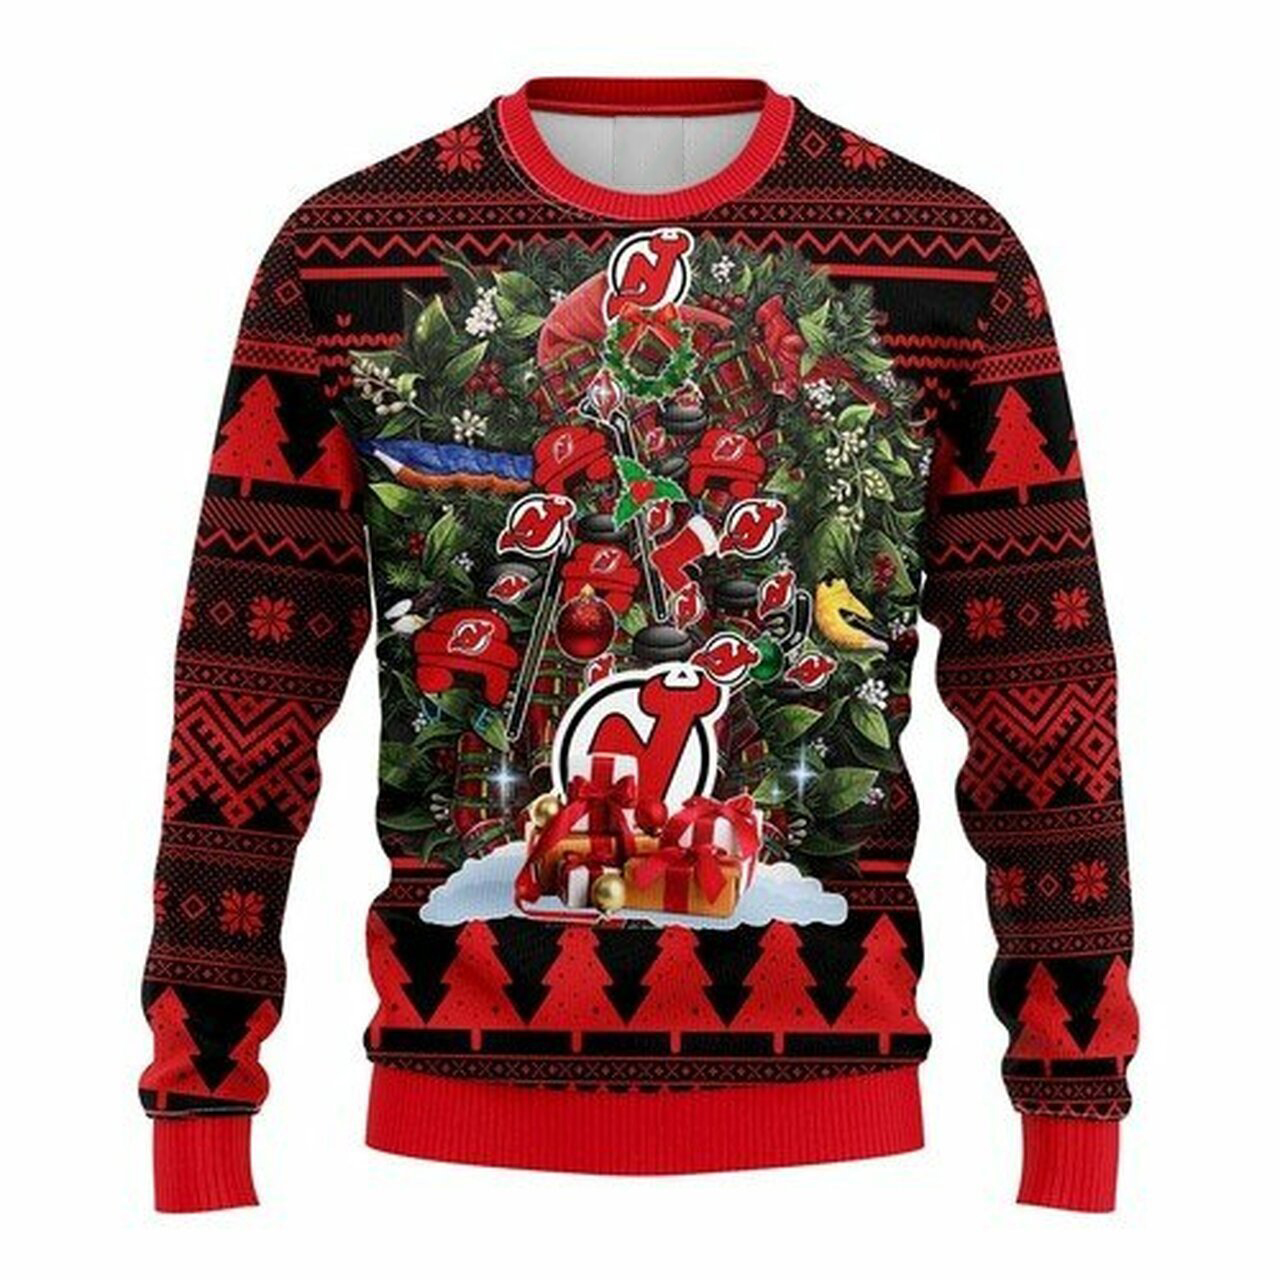 [ COOL ] NHL New Jersey Devils christmas tree ugly sweater – Saleoff 281221